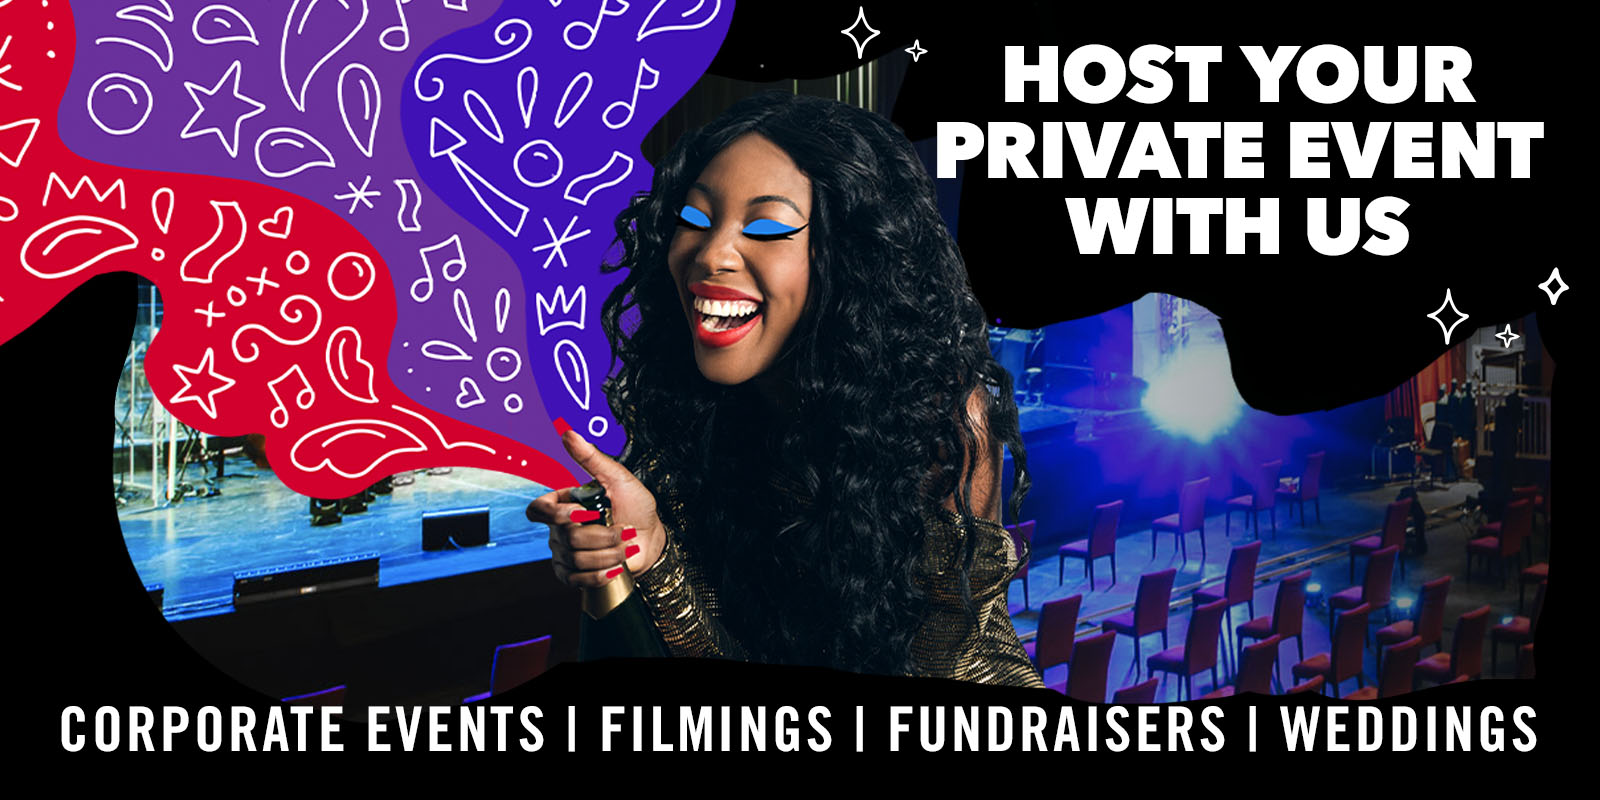 Host Your Private Event With Us